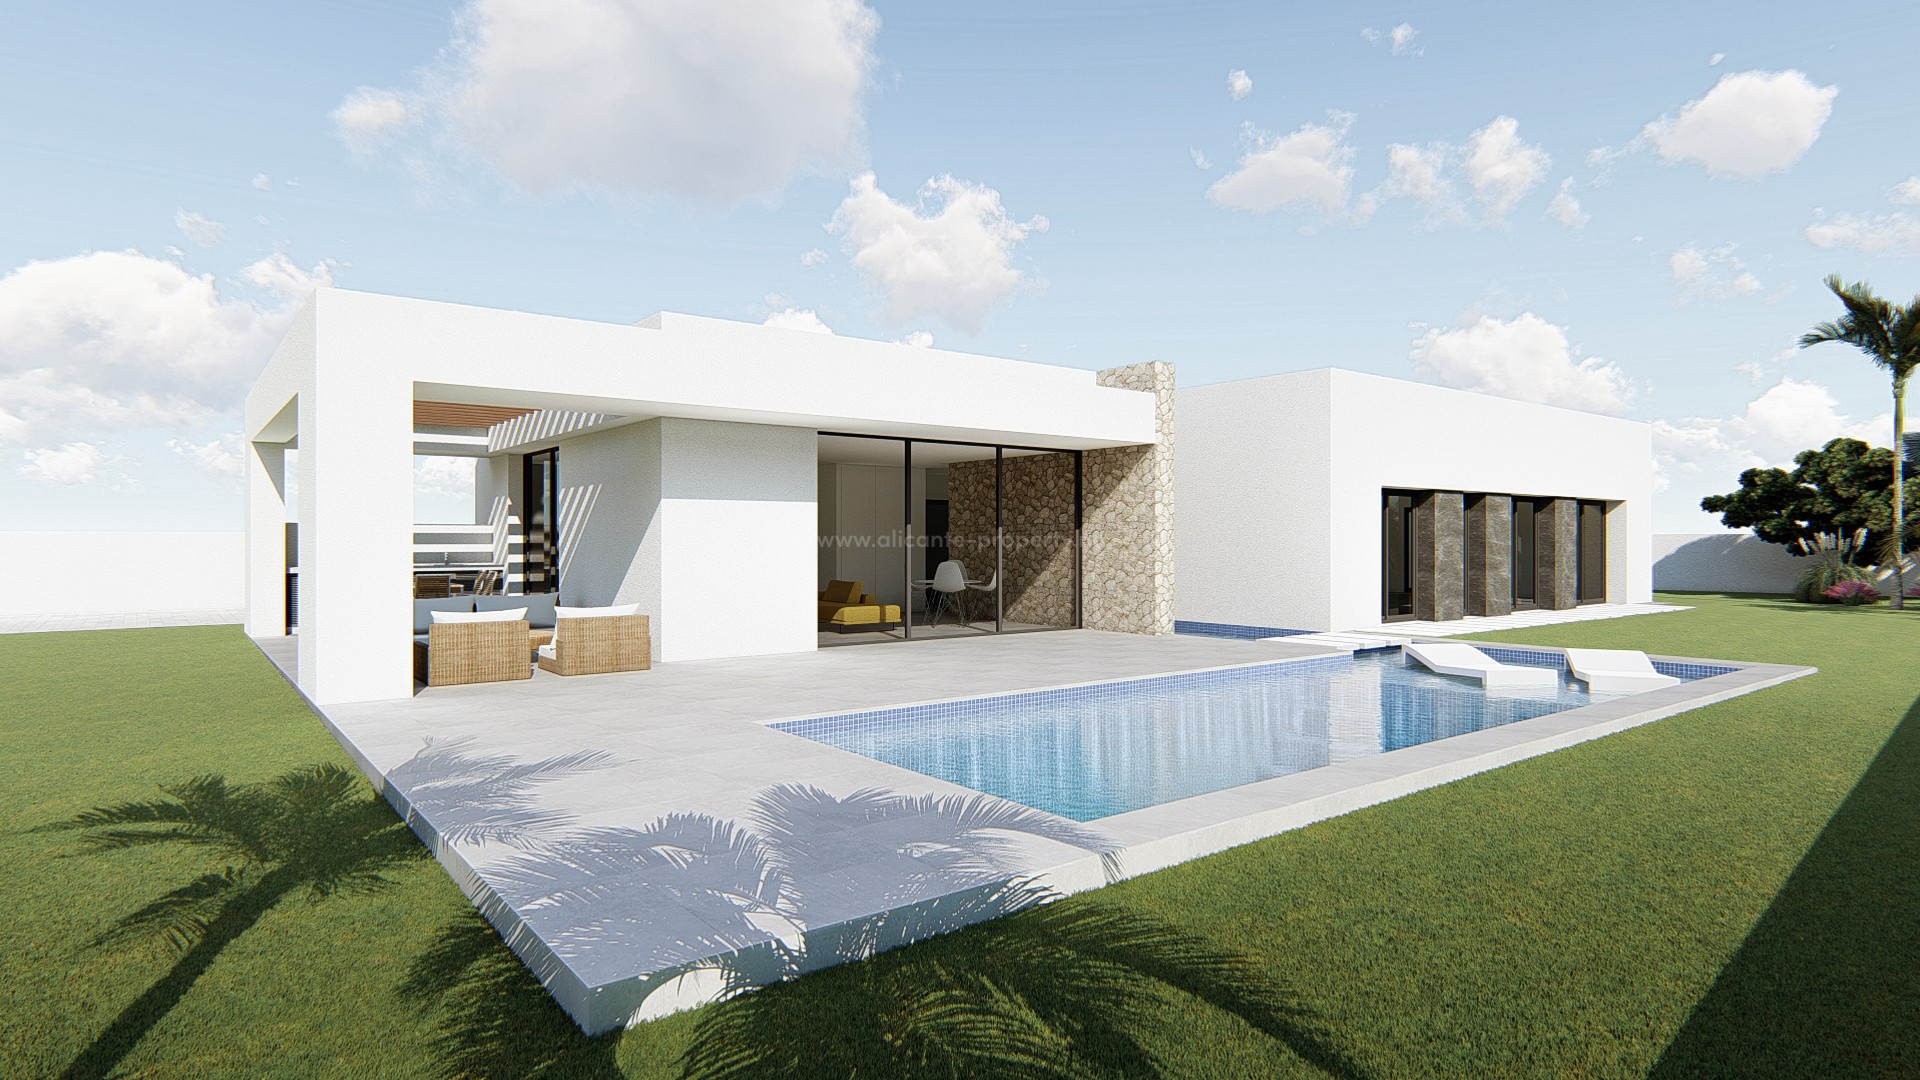 Luxury villa in Moraira/Javea only 600 meters from the beautiful beaches, plot of 823m2 and living area of 510m2. Large terrace with pool, a garden with a beautiful view.